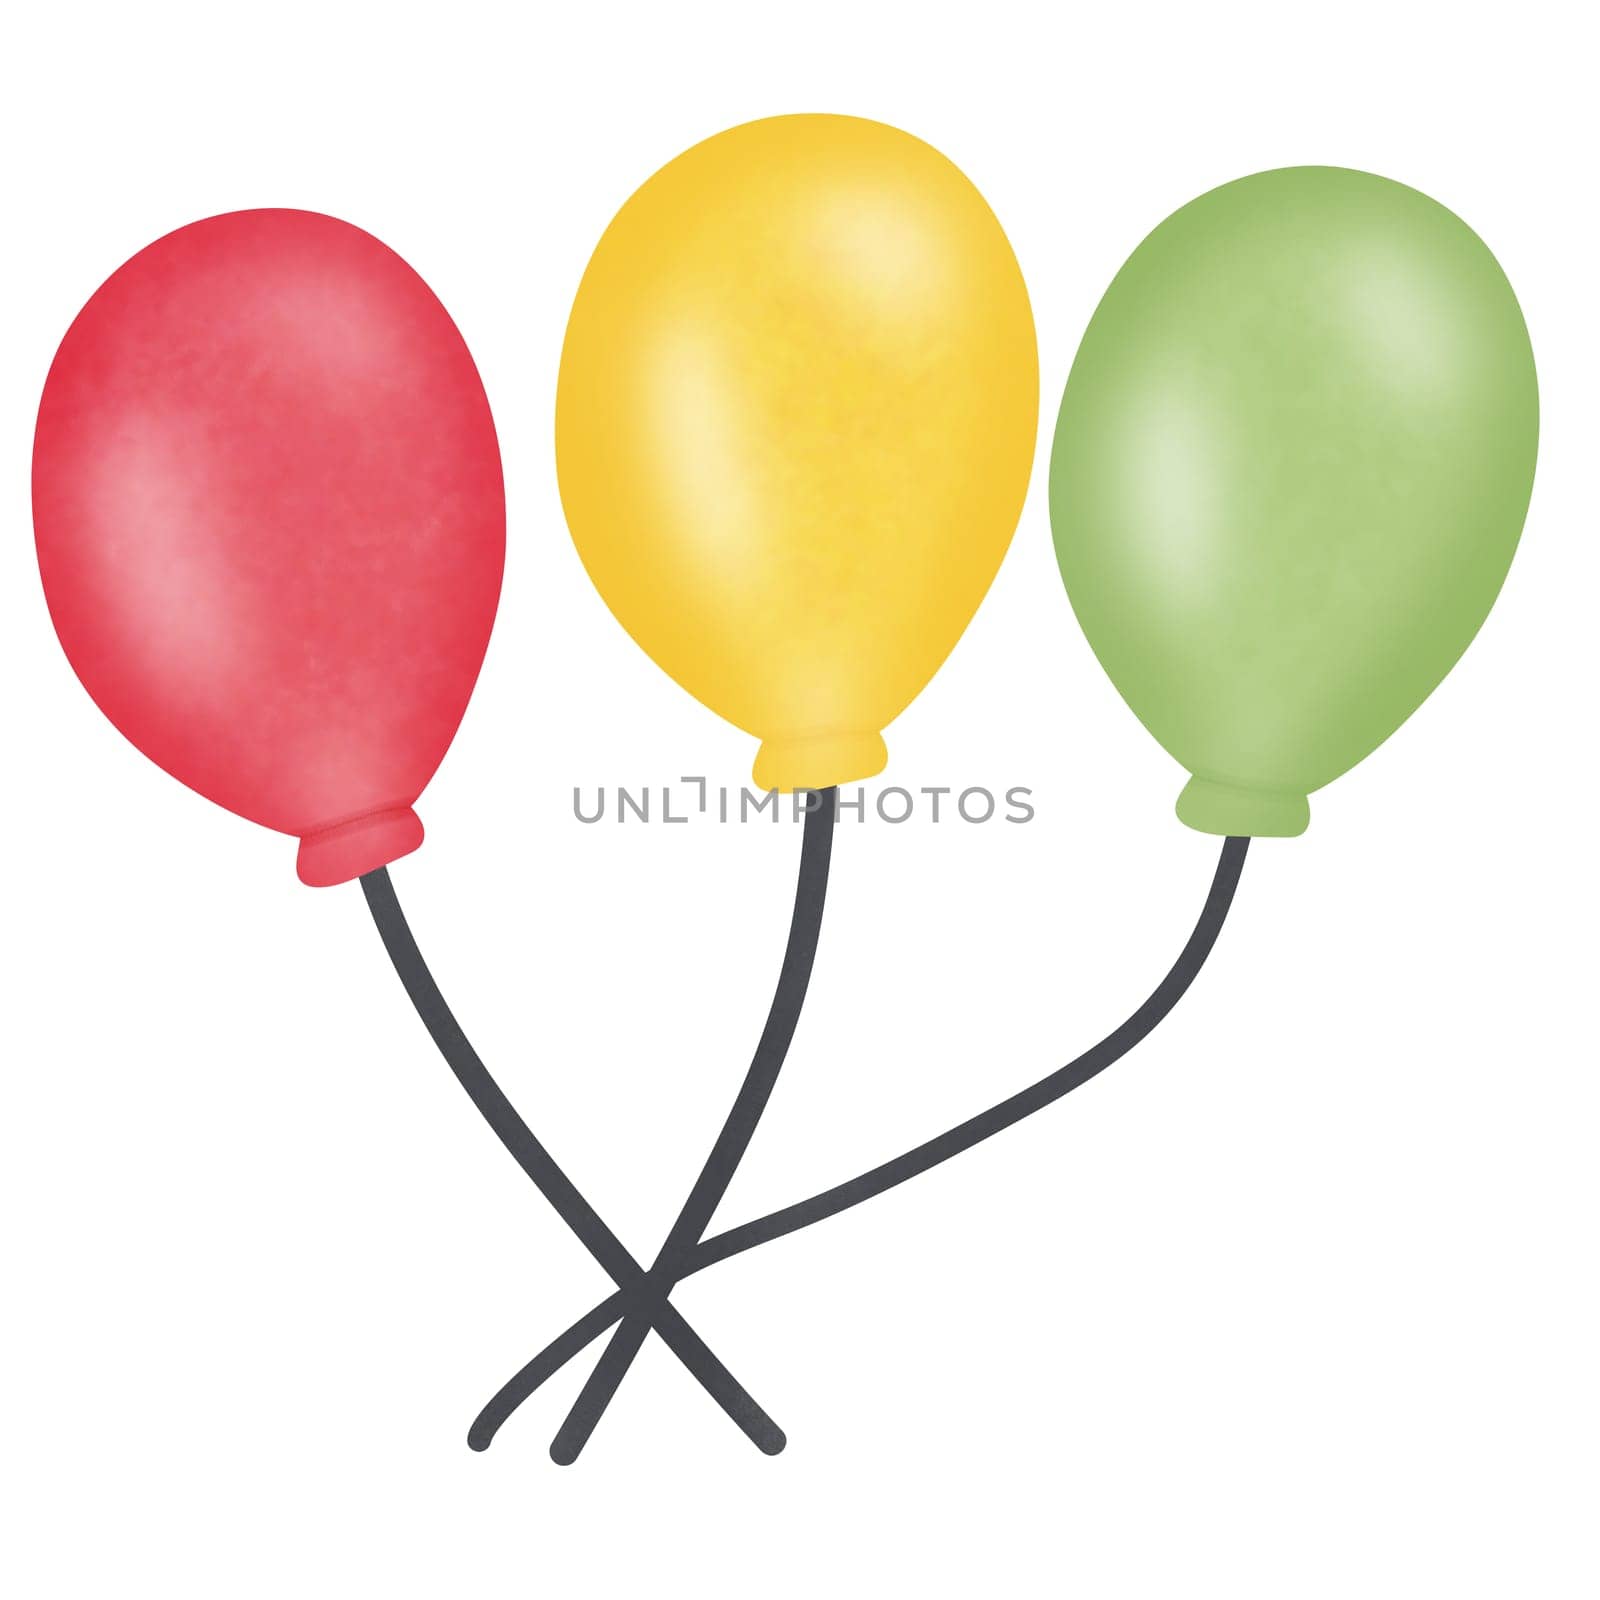 Drawing of colorful of balloon isolated on white background for usage as an illustration and a decorative element by iamnoonmai